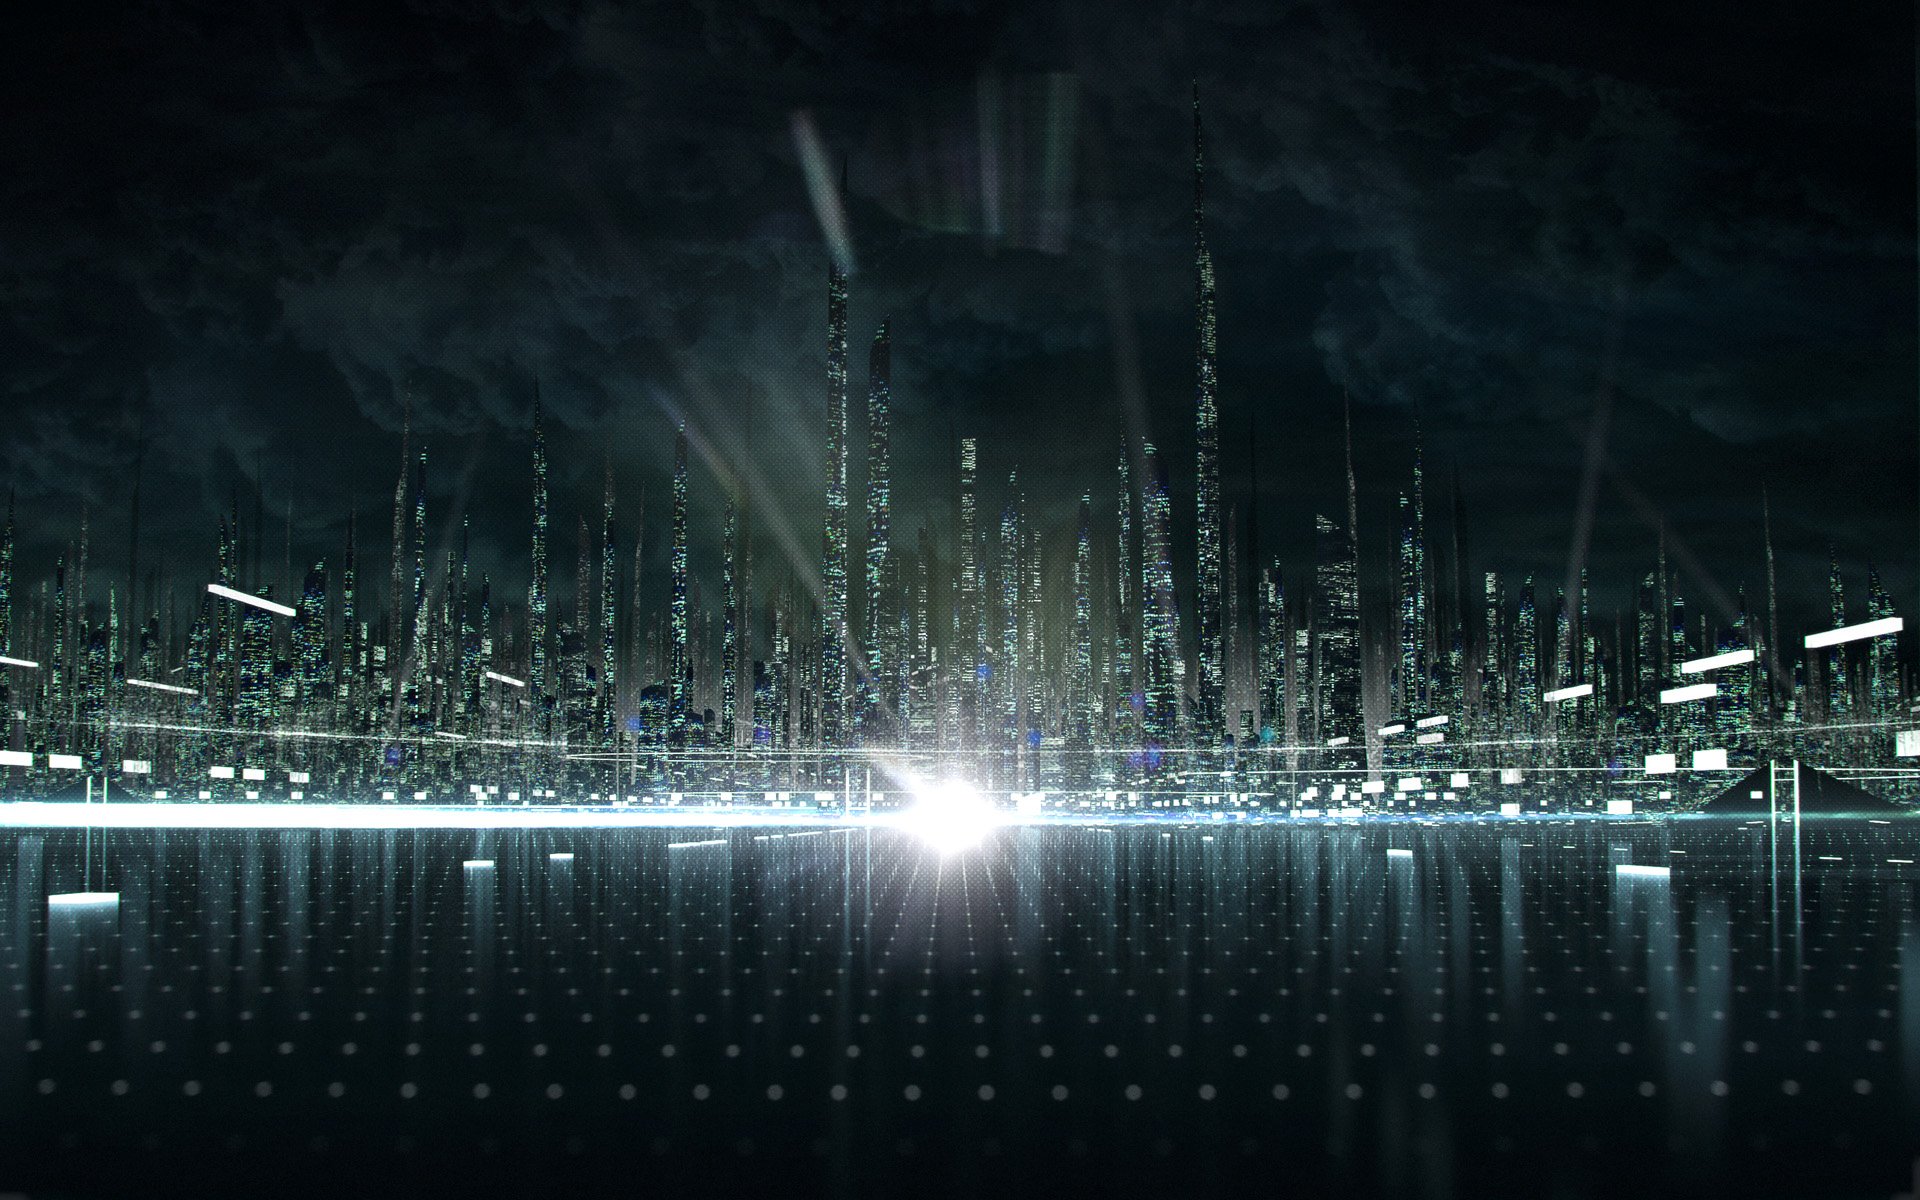  in the Tron virtual world from Disneys Tron Legacy movie wallpaper 1920x1200